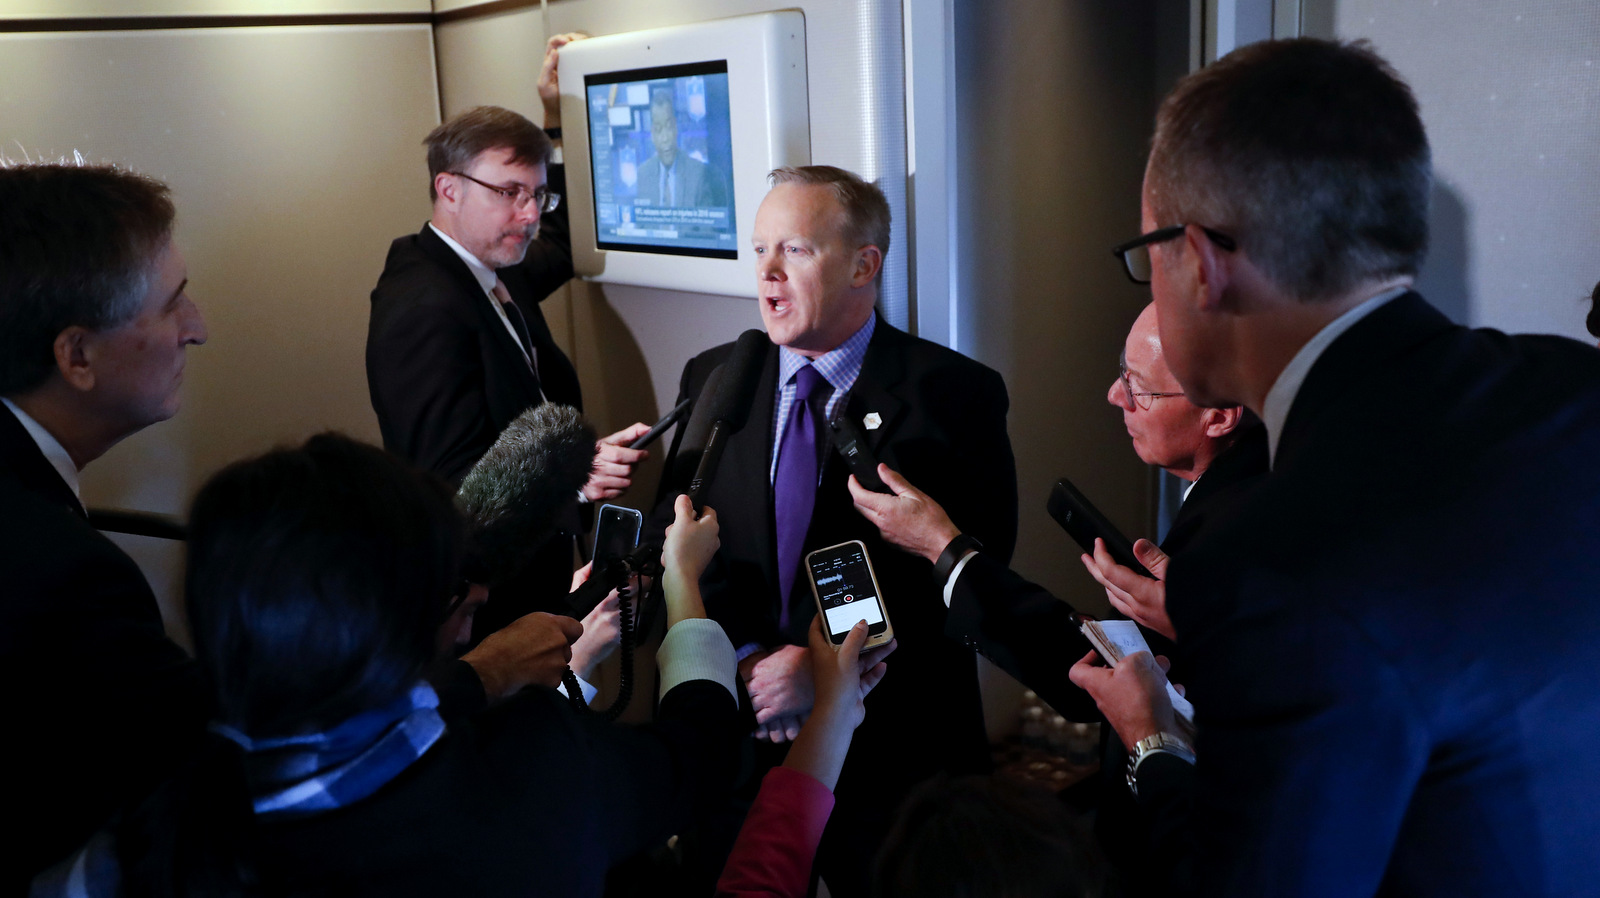 White House press secretary Sean Spicer speaks to reporters on Air Force One en route to Andrews Air Force Base, Thursday, Jan. 26, 2017, from Philadelphia. (AP /Pablo Martinez Monsivais)